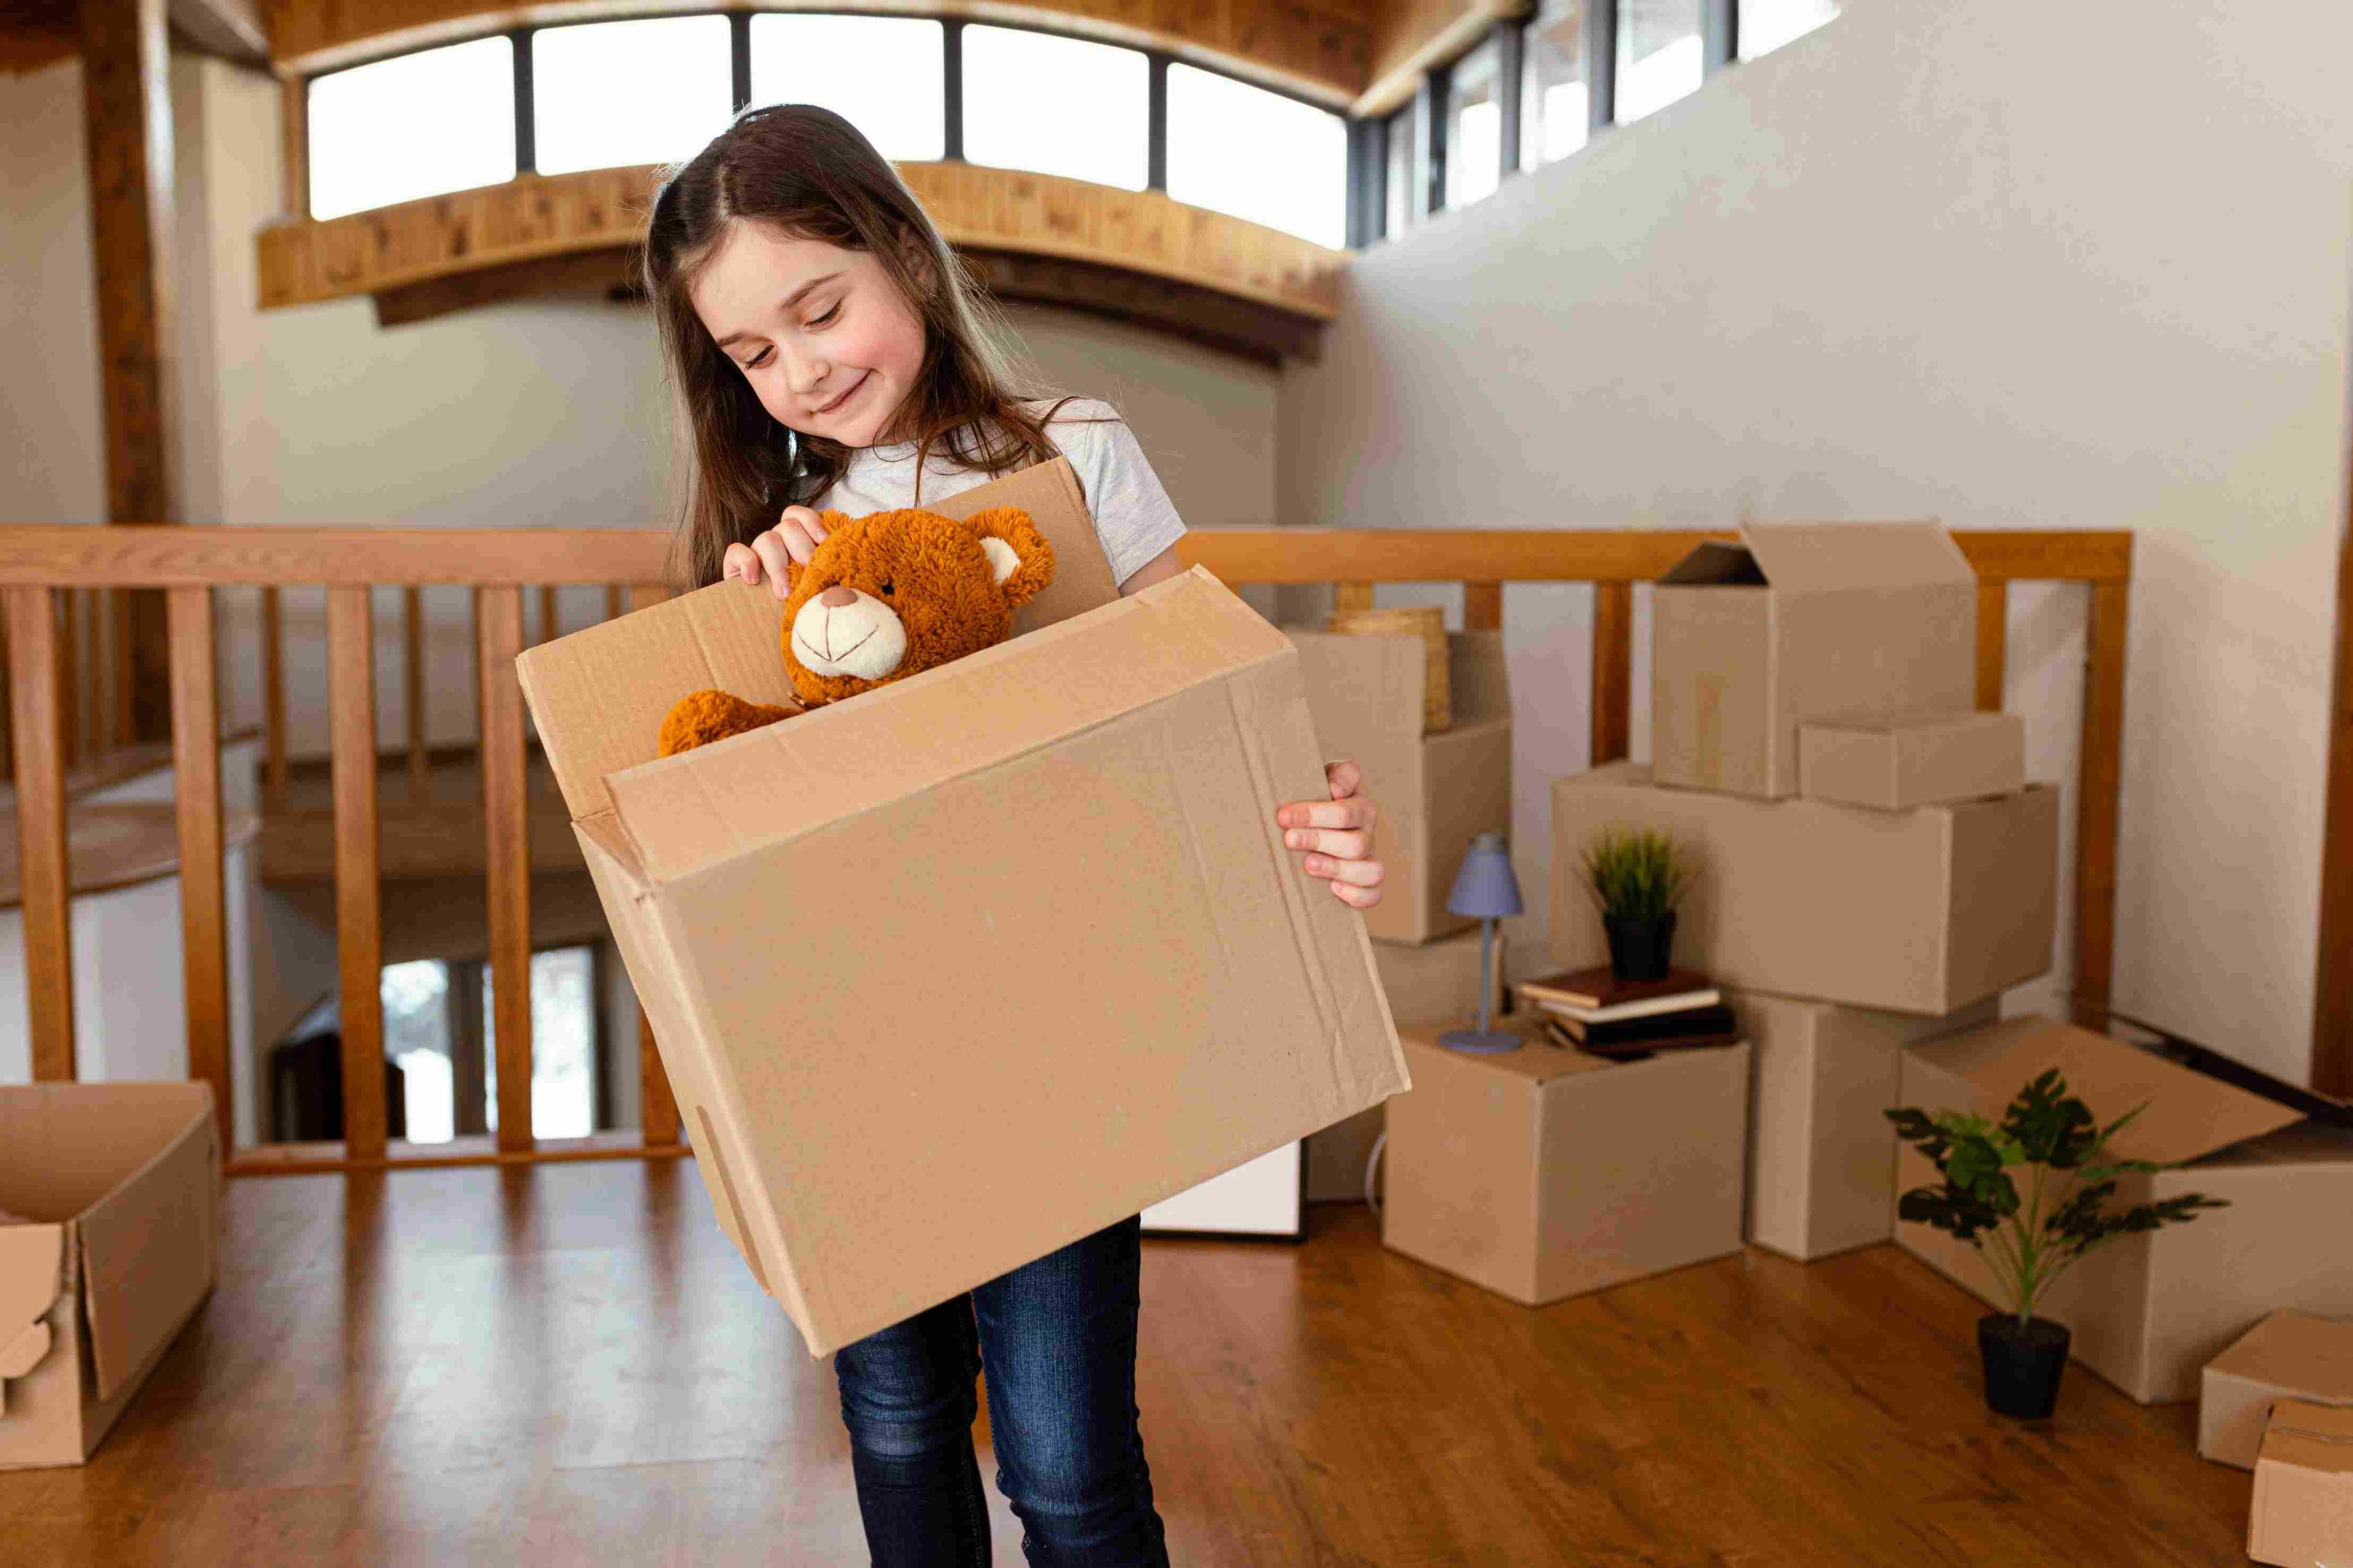  movers and packers in palm Jumeirah Dubai